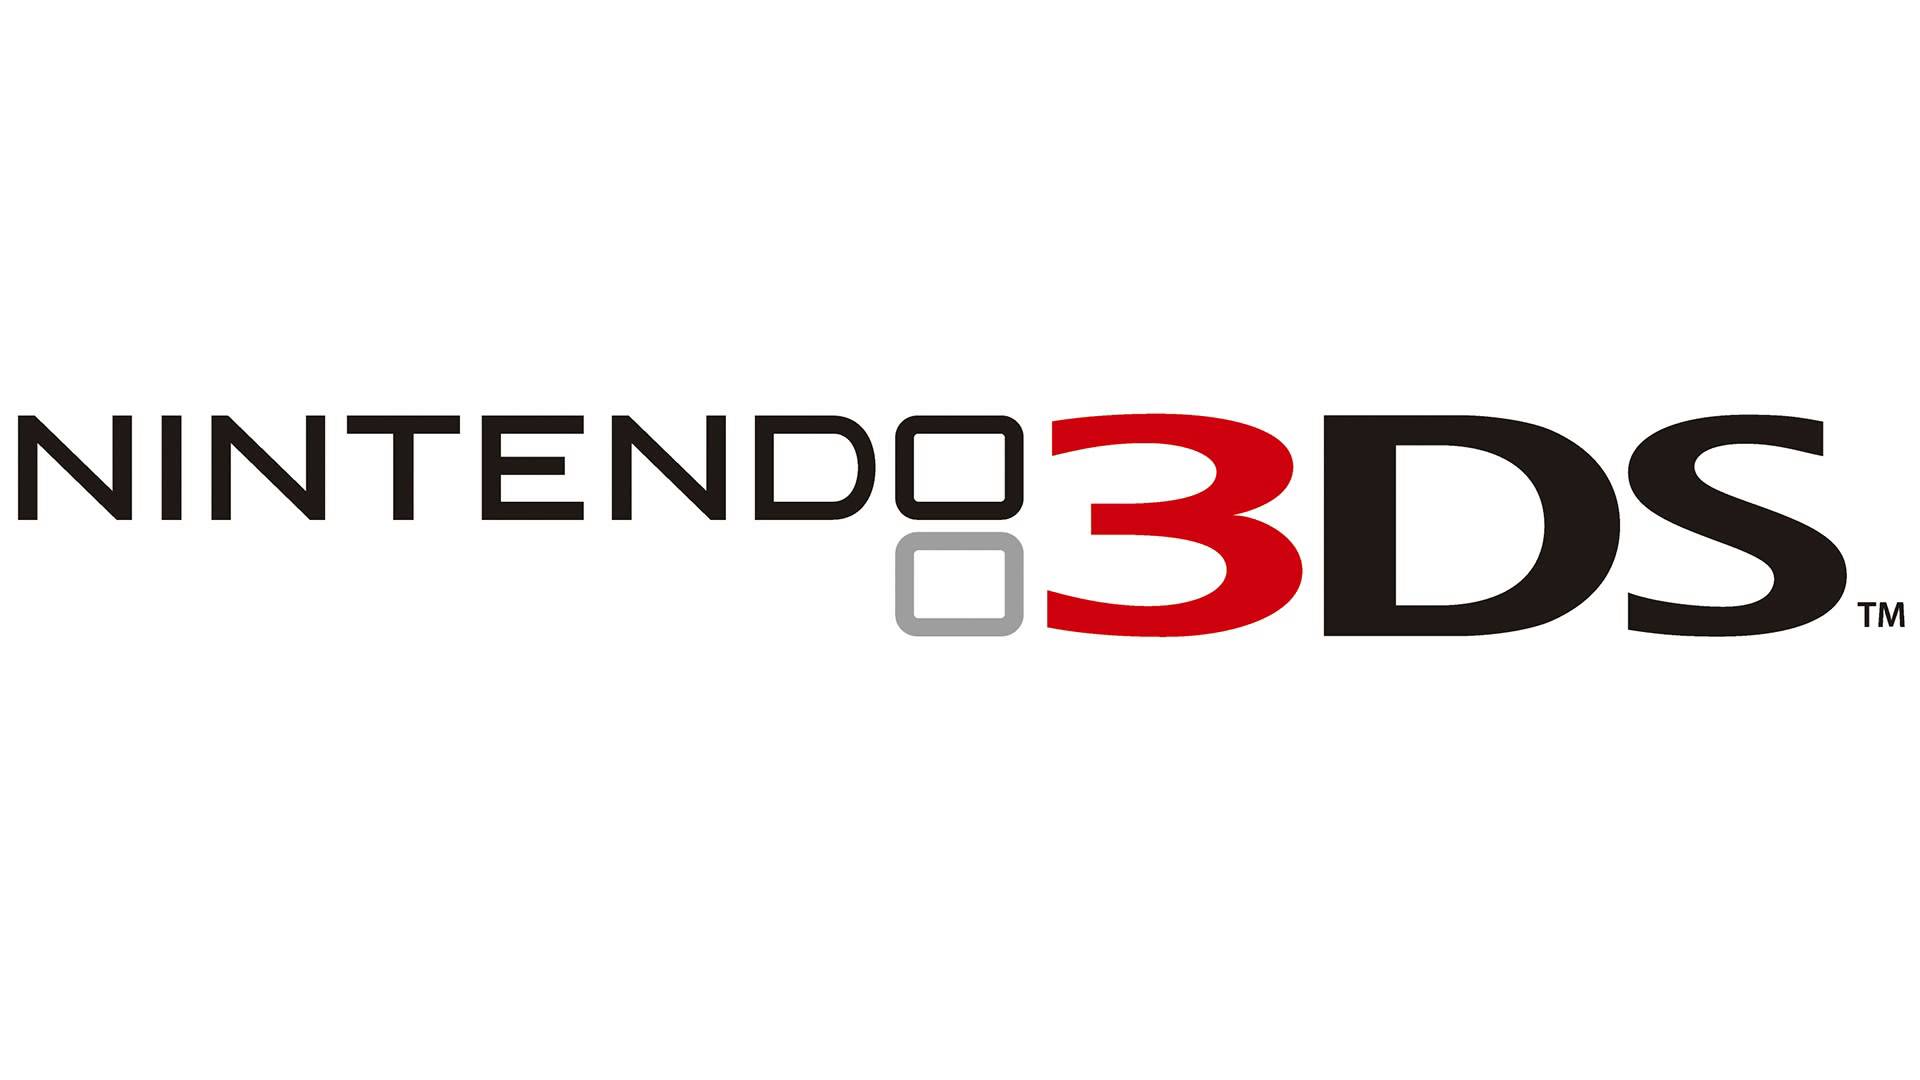 GameSpot Old Logo - The Nintendo 3DS Is Five Years Old This Month! Come Share Your